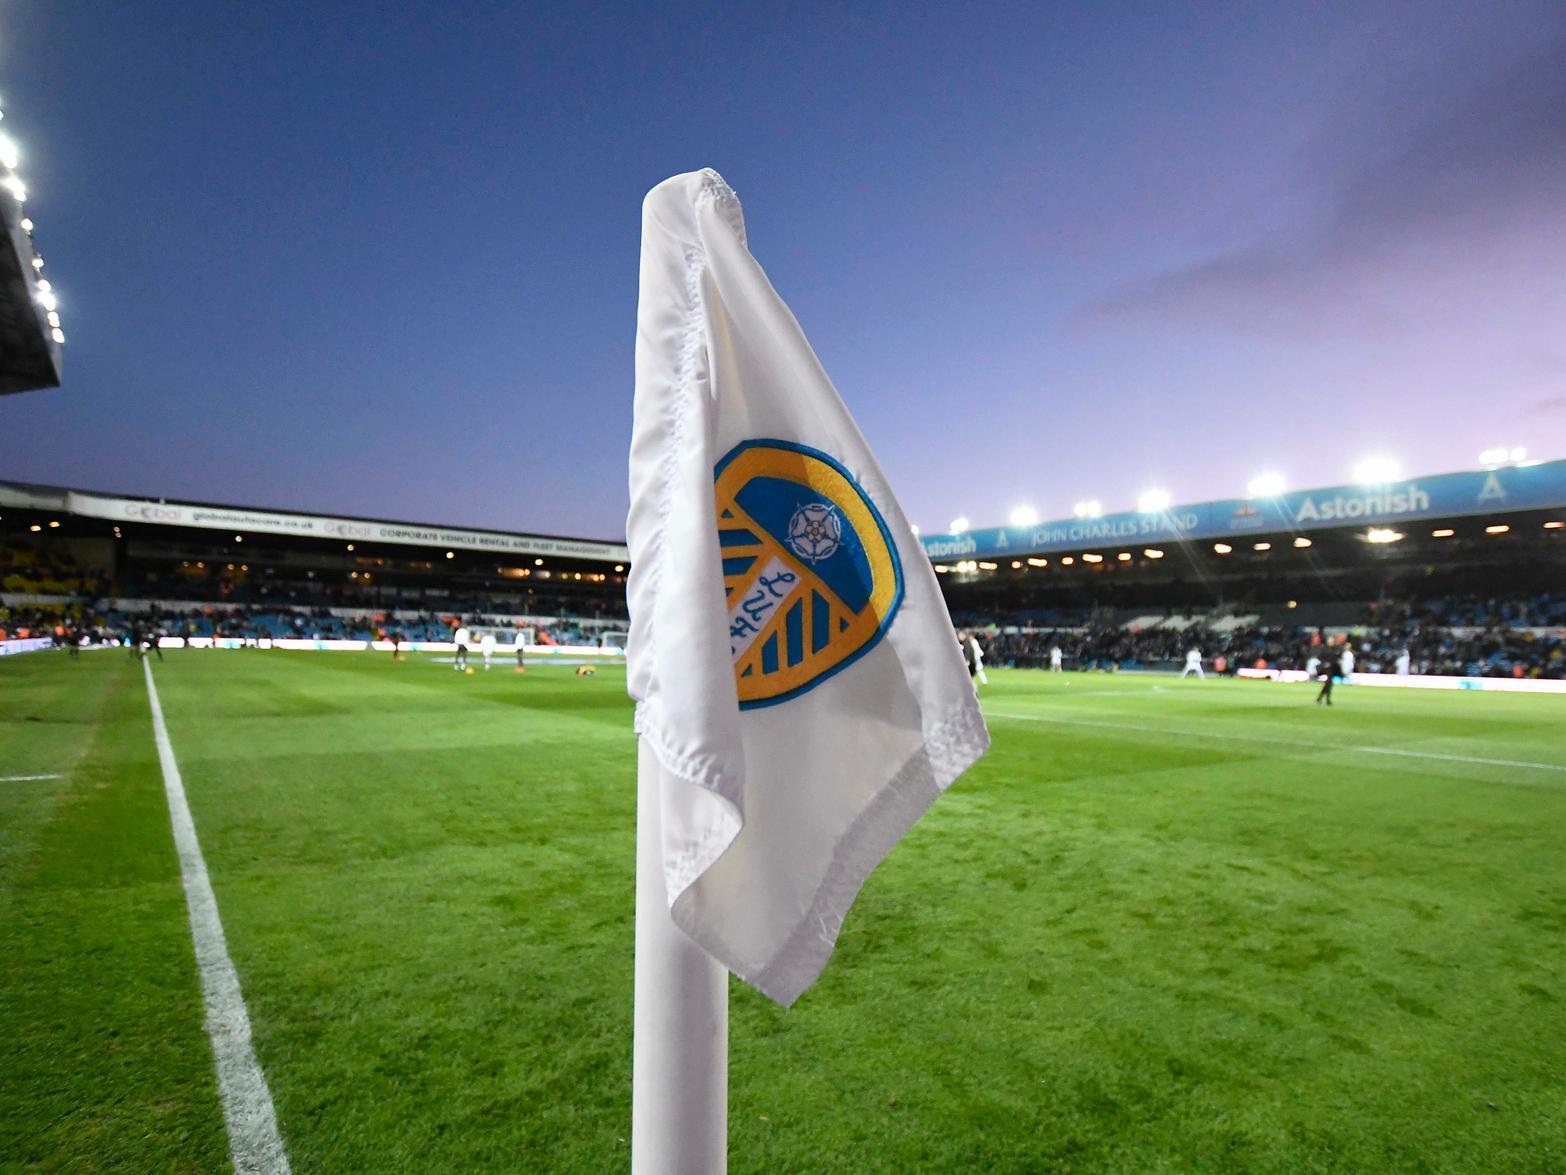 Leeds United have been tipped to announce their new kit sponsor this month, with adidas rumoured to have offered a 'blockbuster package' to become the club's new supplier. (Footballer Insider)